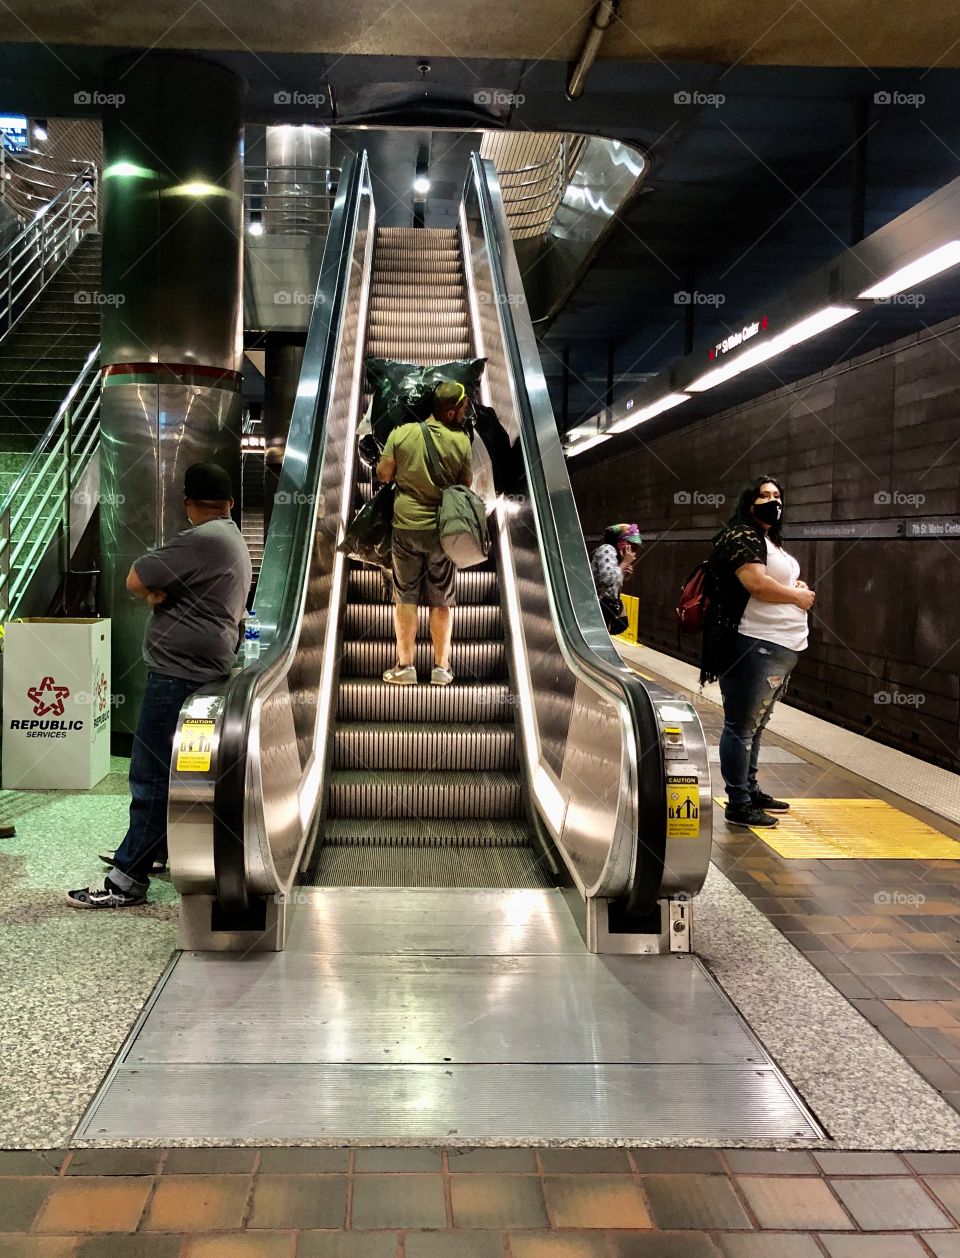 A homeless man pushes his shopping cart overloaded with belongings up an escalator at 7th St Metro Station.  Los Angeles CA 6.12.2020